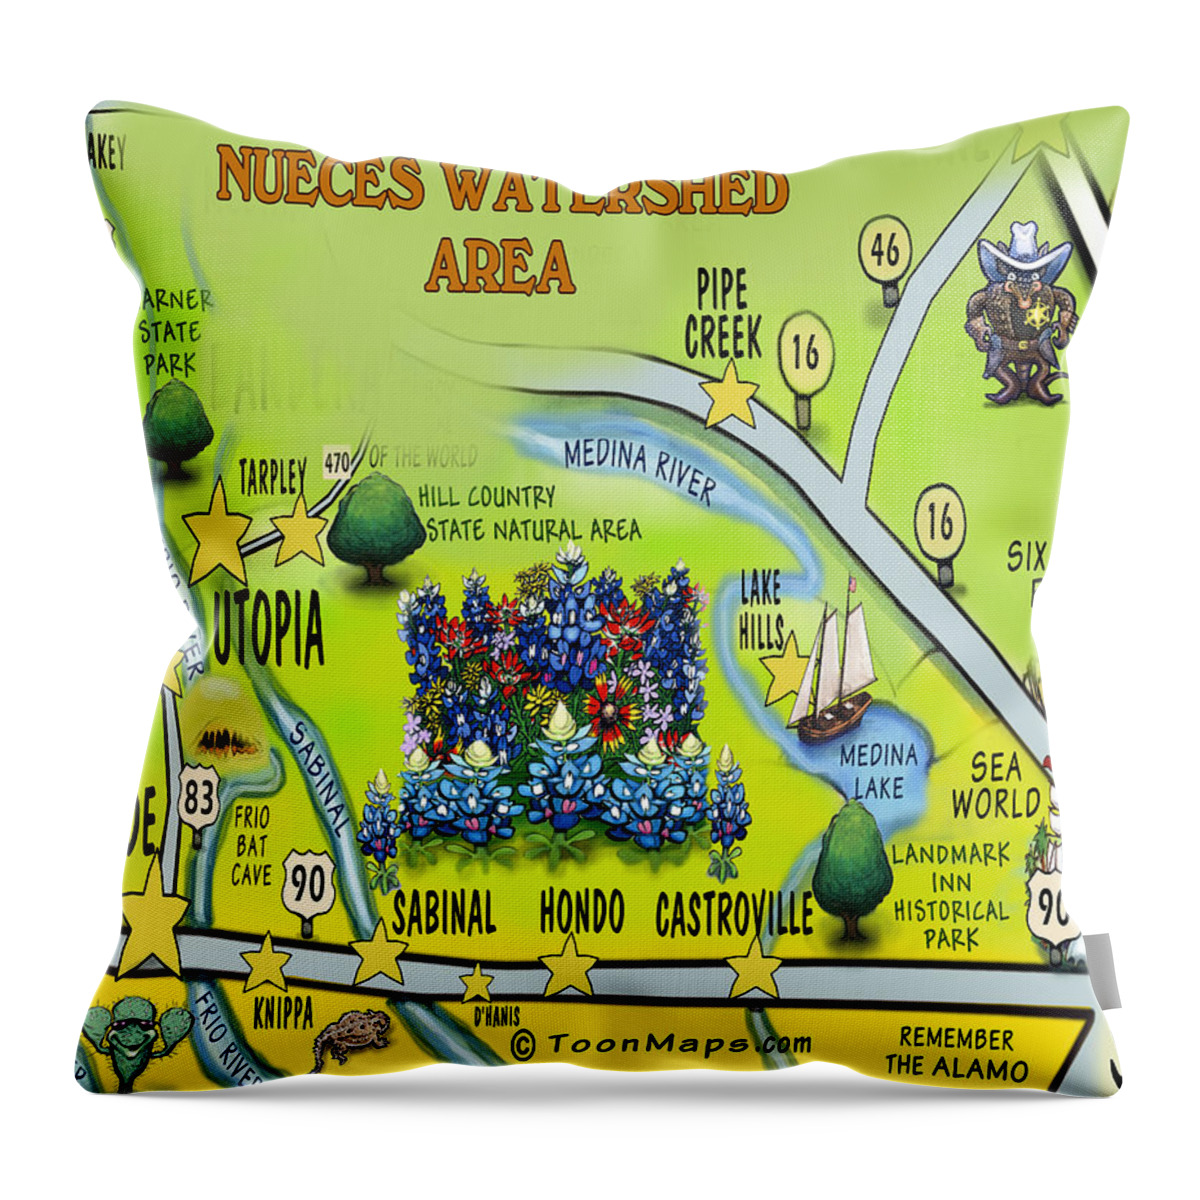 Nueces Watershed Area Throw Pillow featuring the digital art Nueces Watershed Area by Kevin Middleton